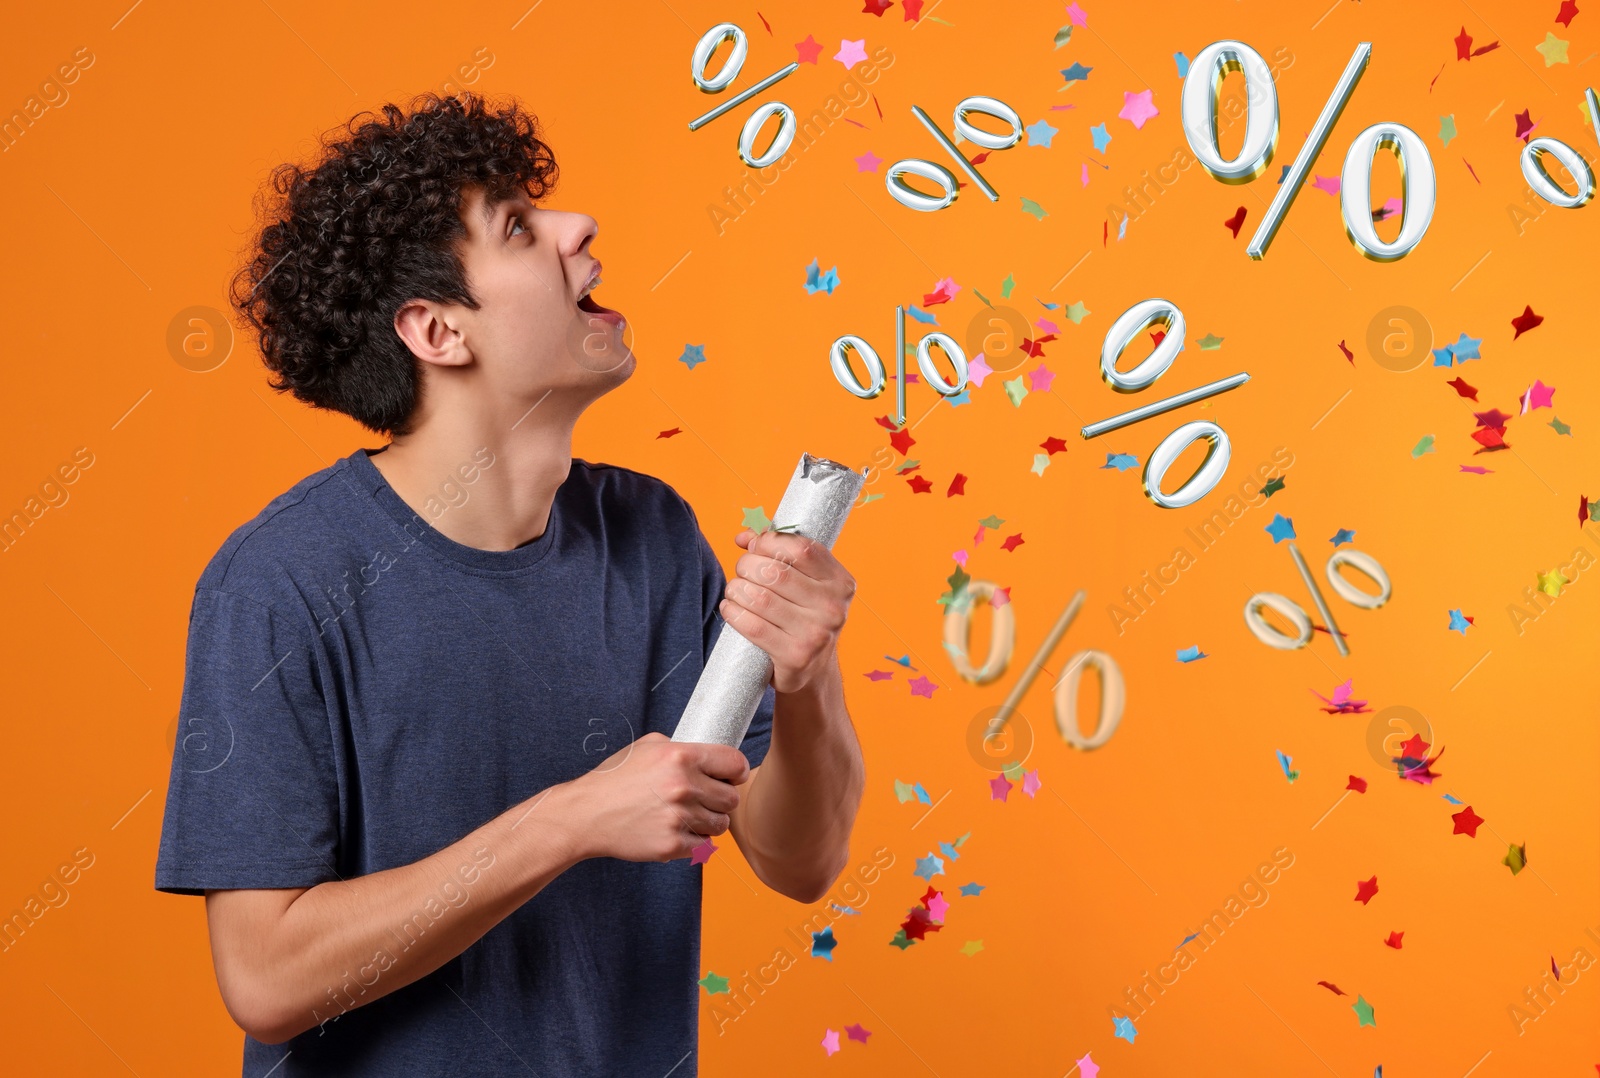 Image of Discount offer. Happy young man blowing up party popper on orange background. Confetti and percent signs in air